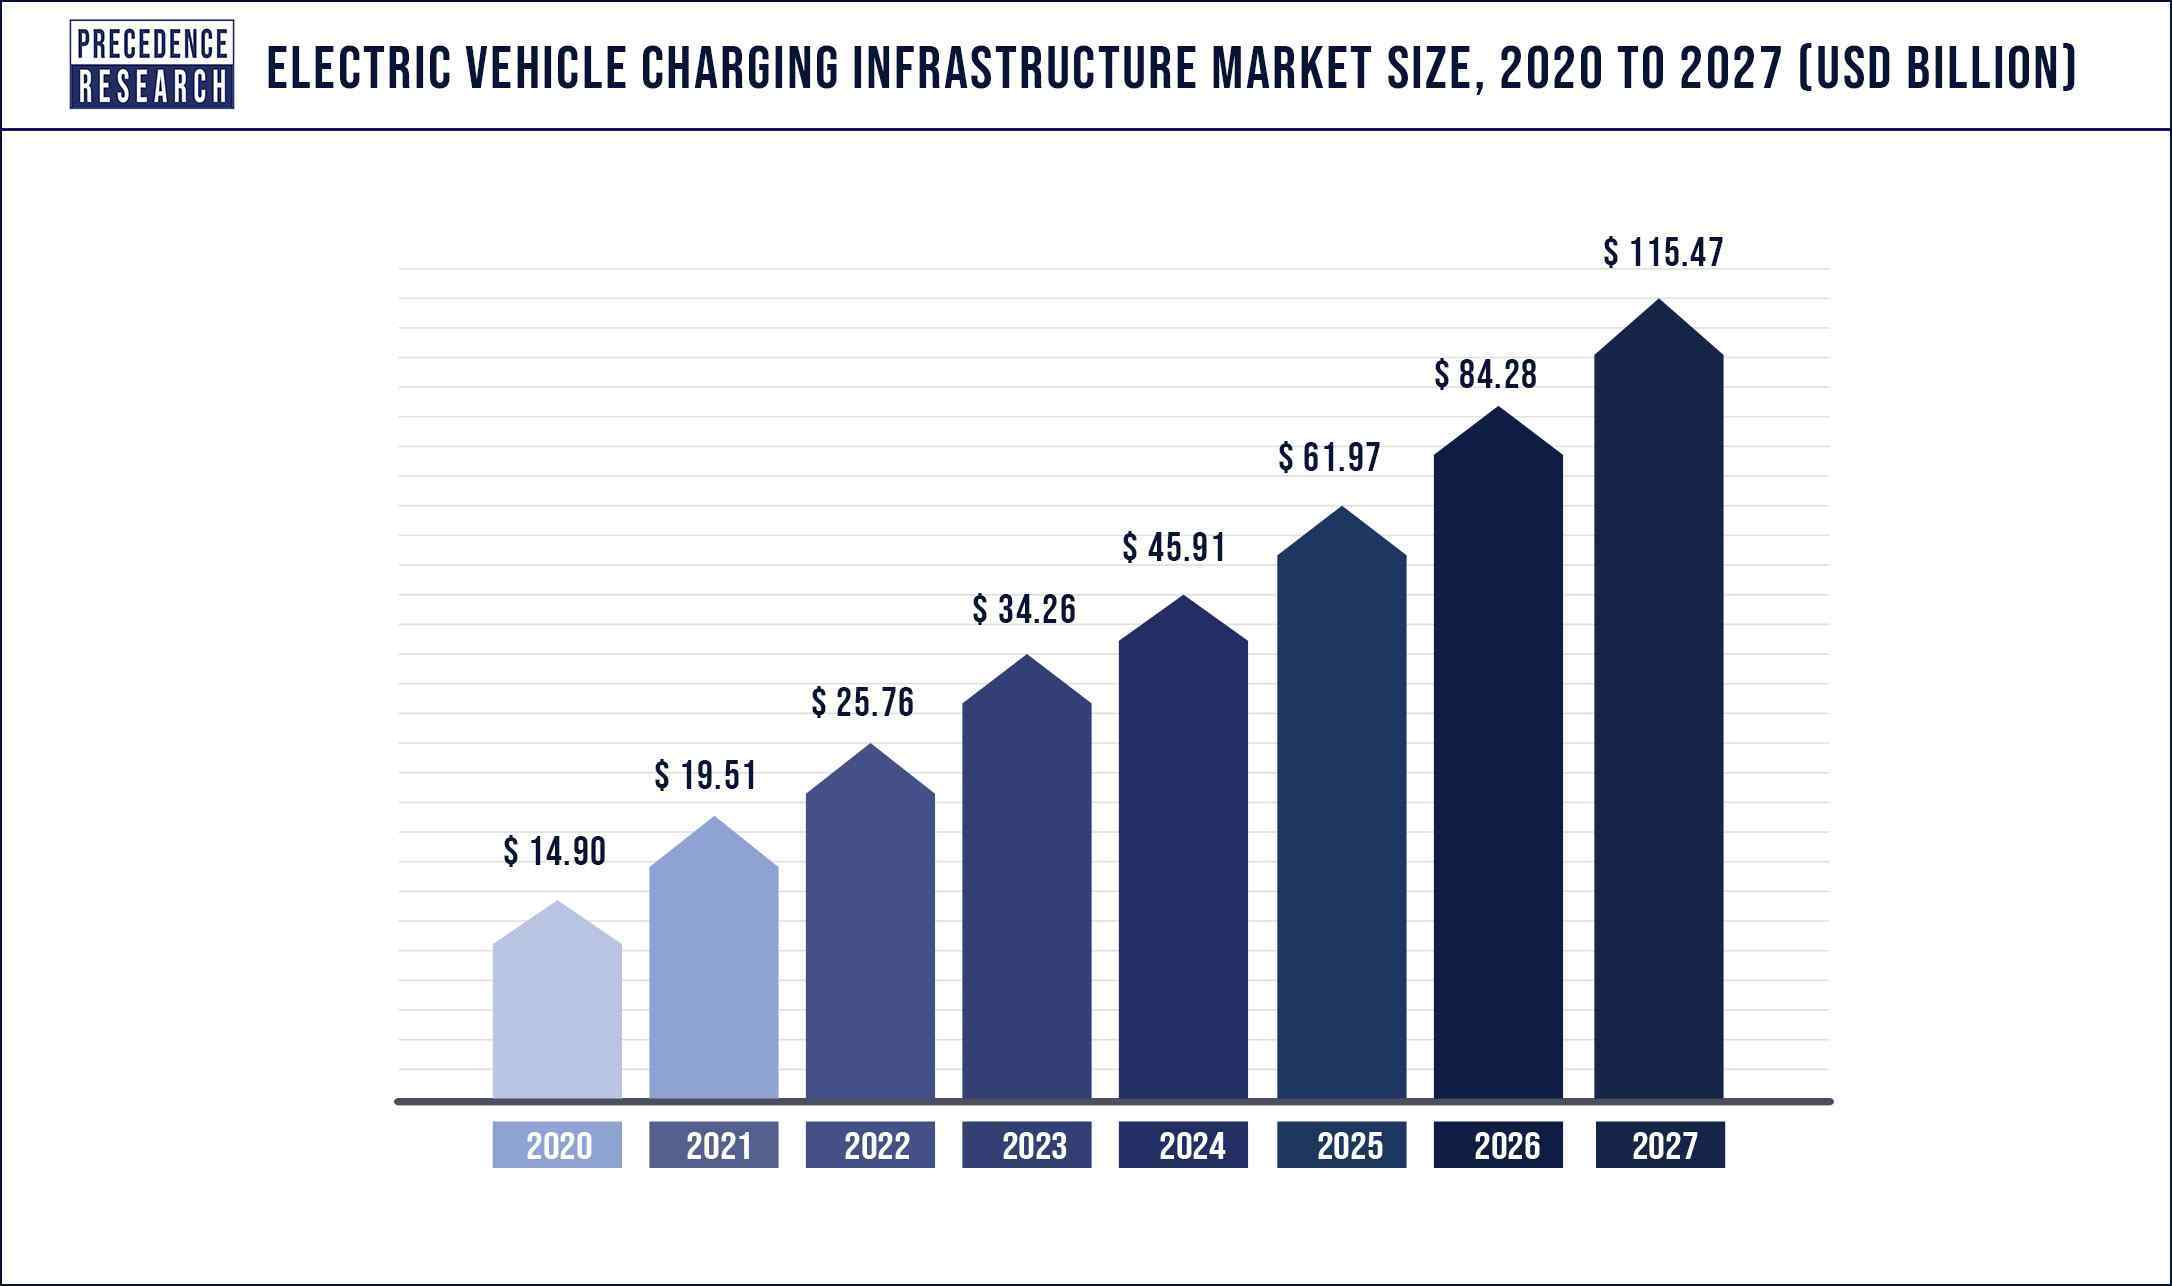 Electric Vehicle Charging Infrastructure Market Size 2020 to 2027